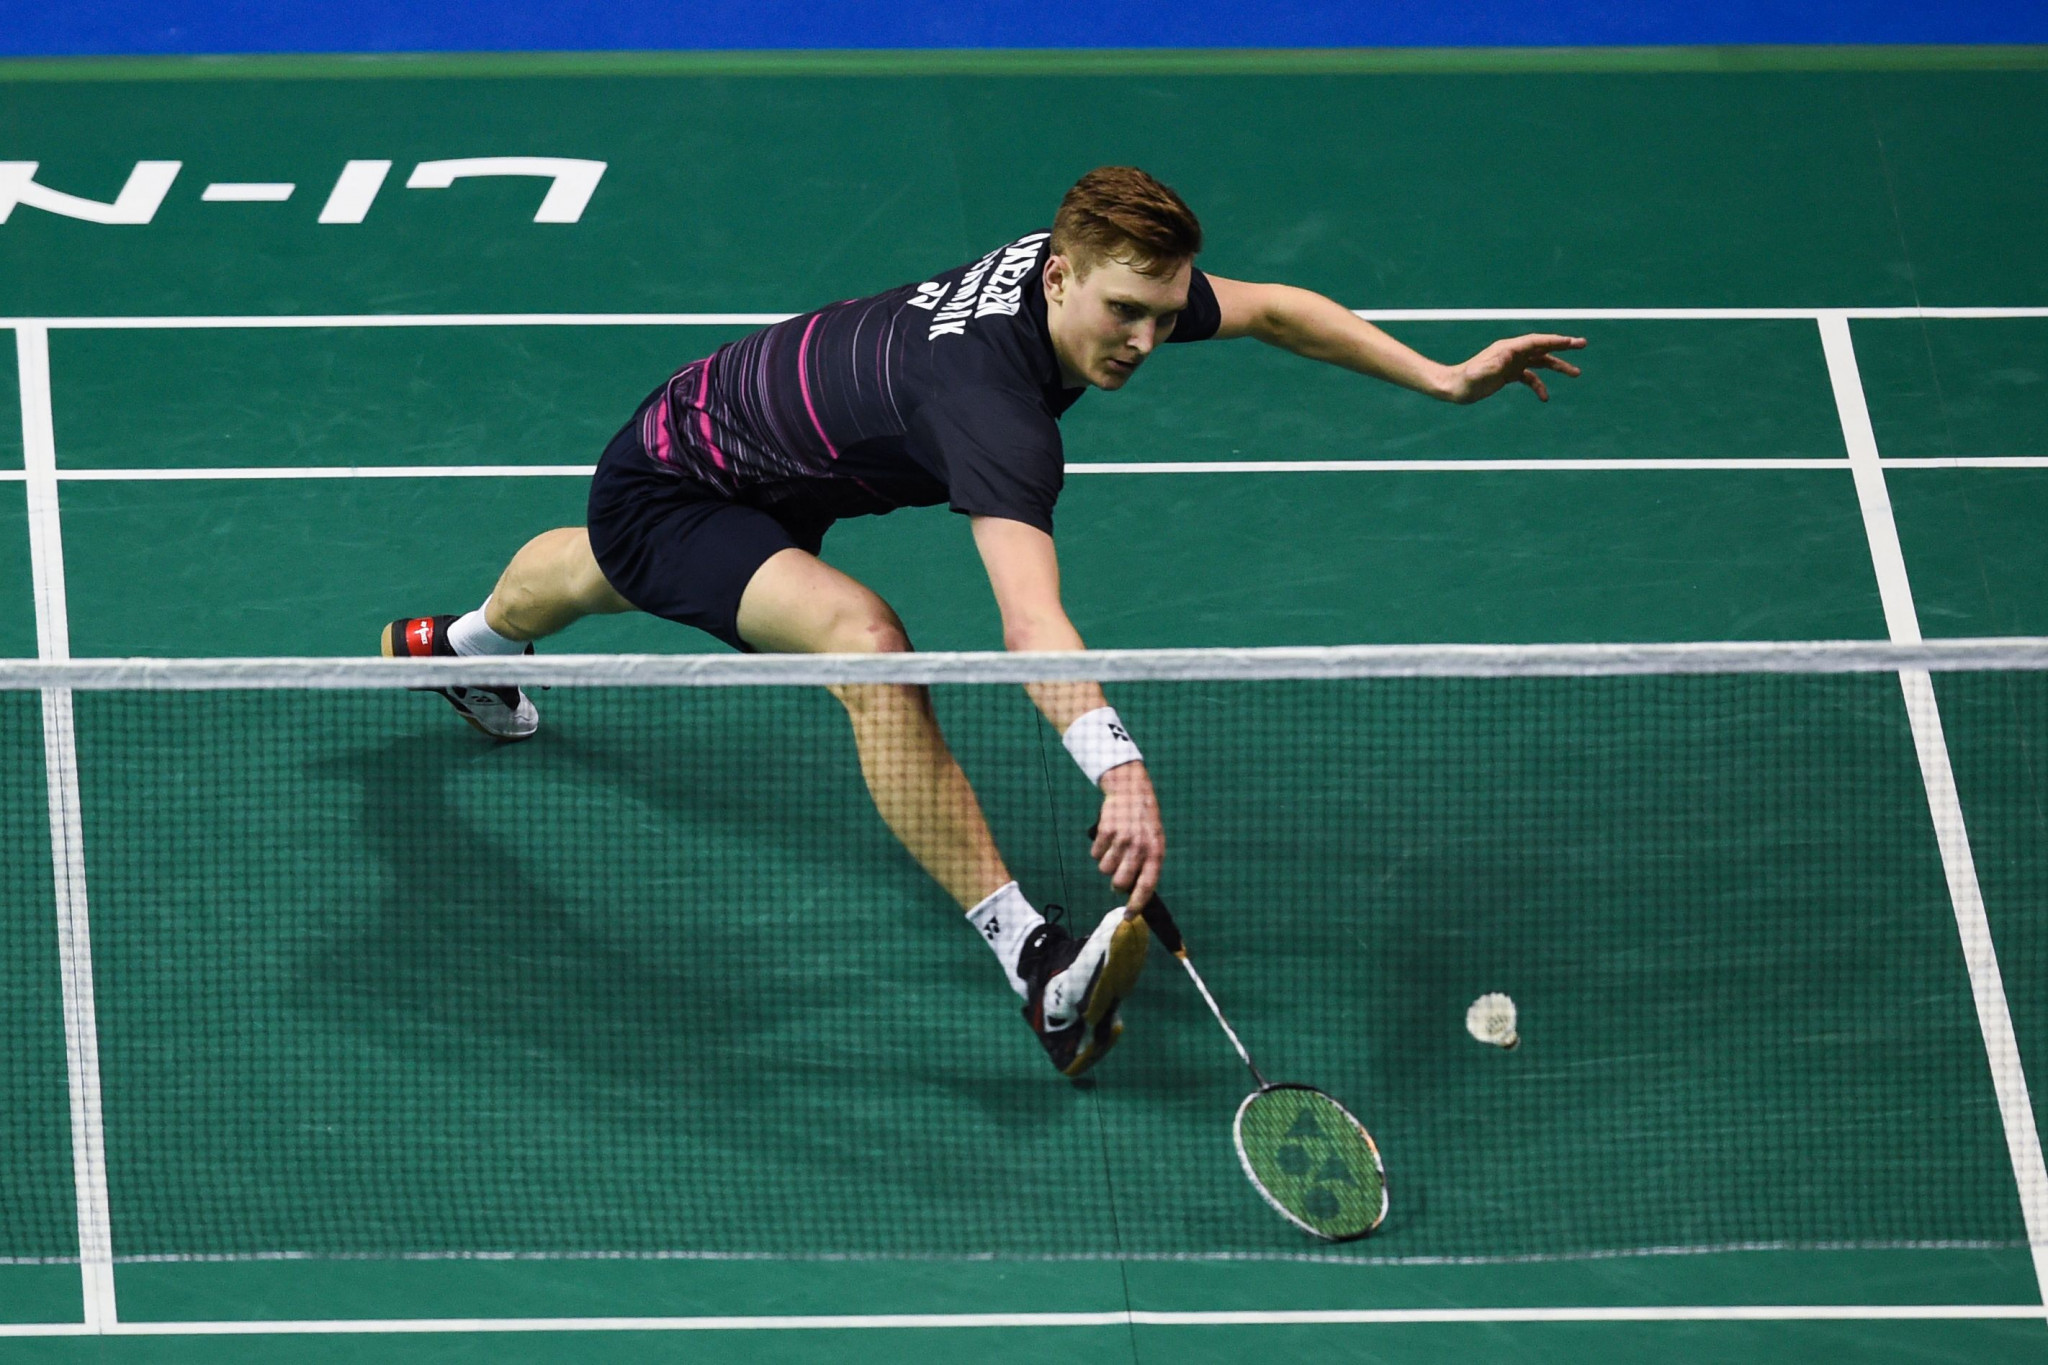 Axelsen claims badminton players will have to be "cautious" about "extremely ambitious" schedule